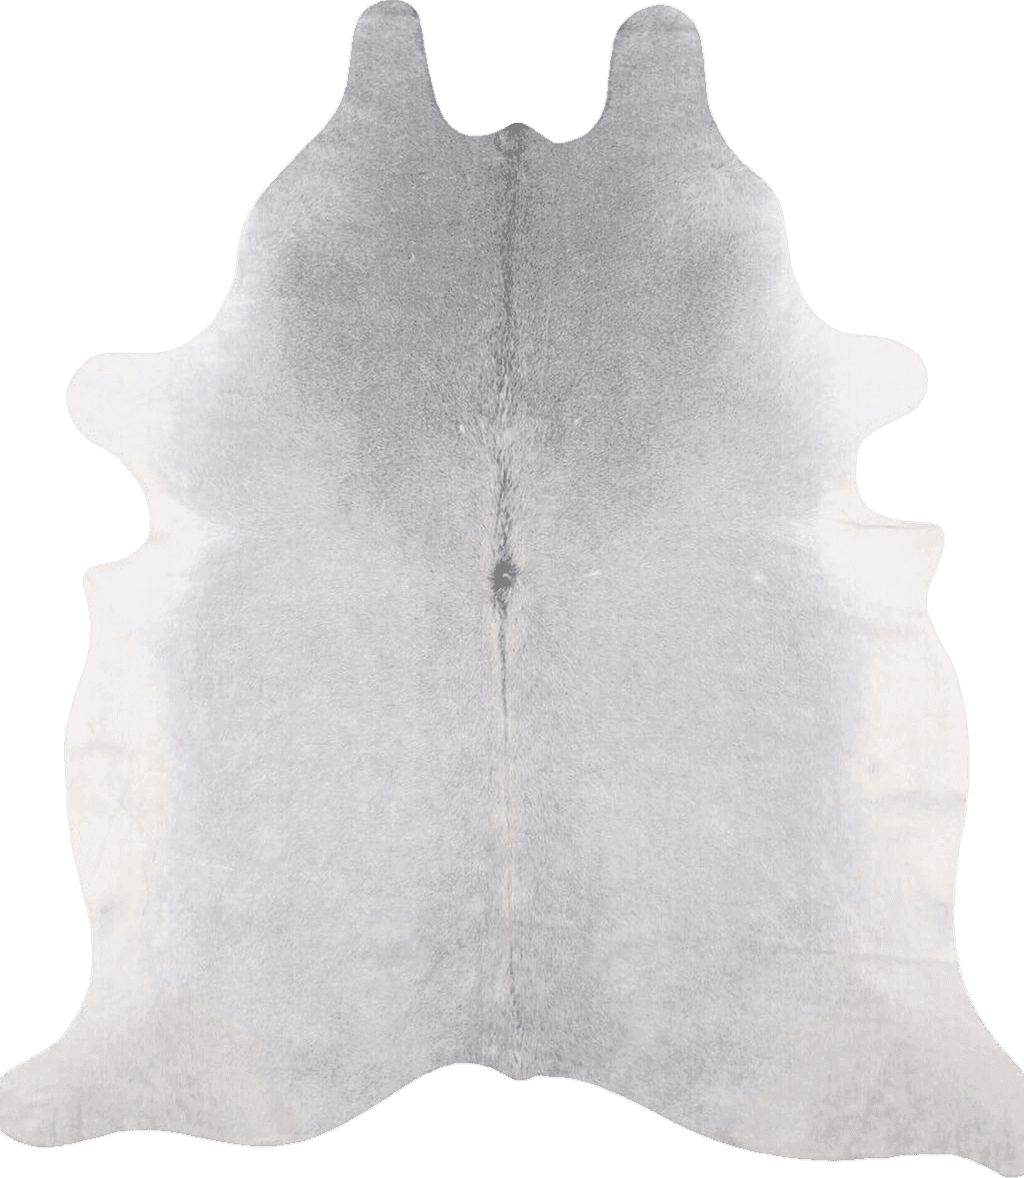 Cowhide Rug Large Best Living Room and Home Office Decor Area Rug Natural Grey and White Animal Skin Hairon learher Carpet Hide